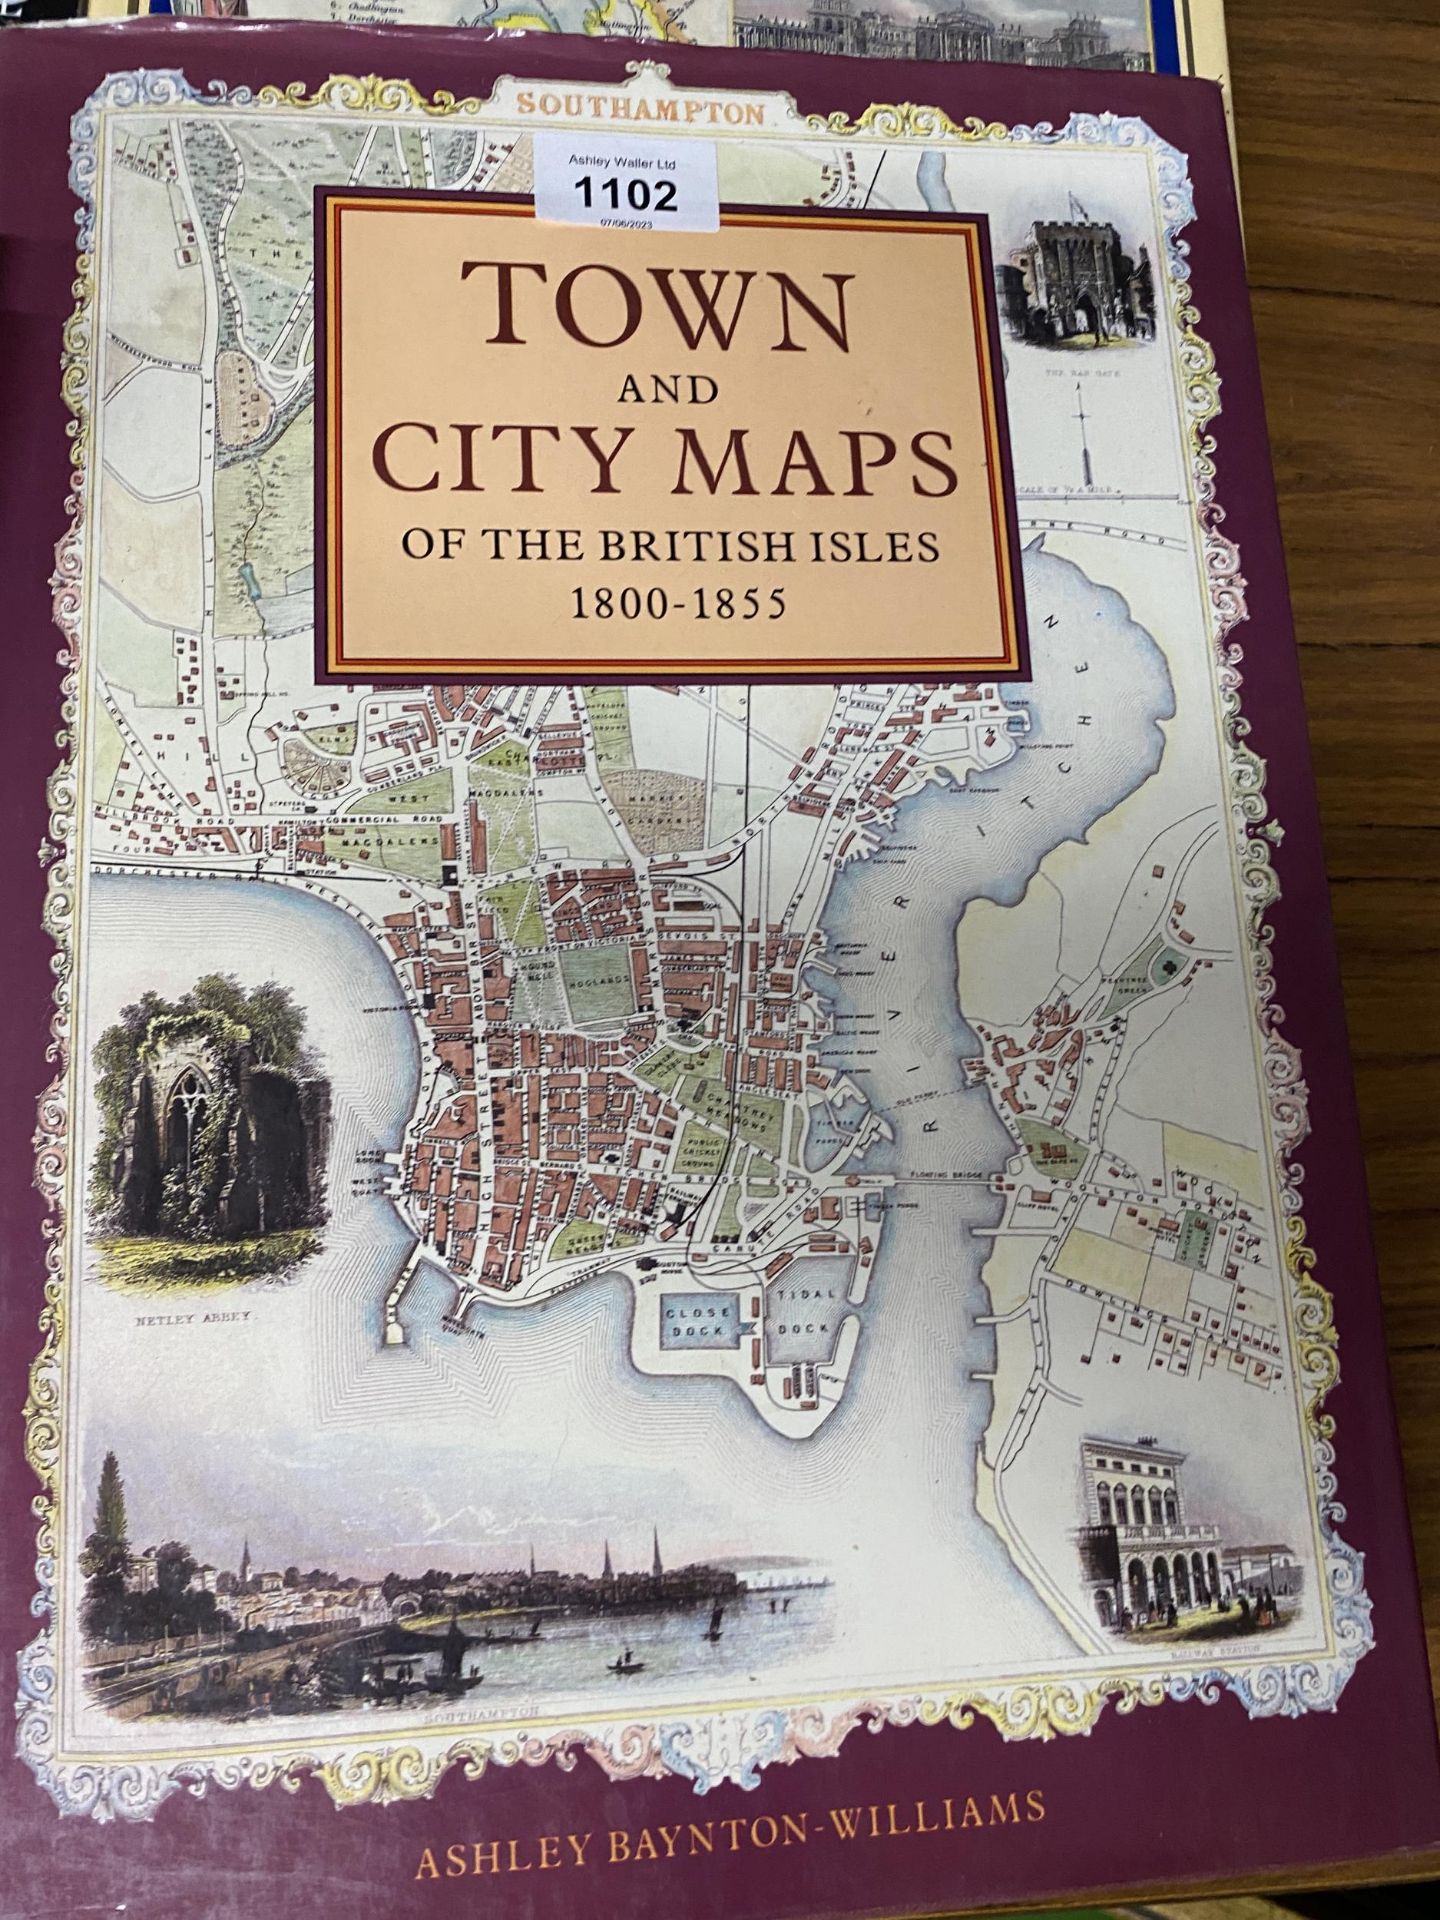 A COLLECTION OF BOOKS, SOTHEBYS CATALOGUES, TOWN AND CITY MAPS ETC - Image 2 of 2